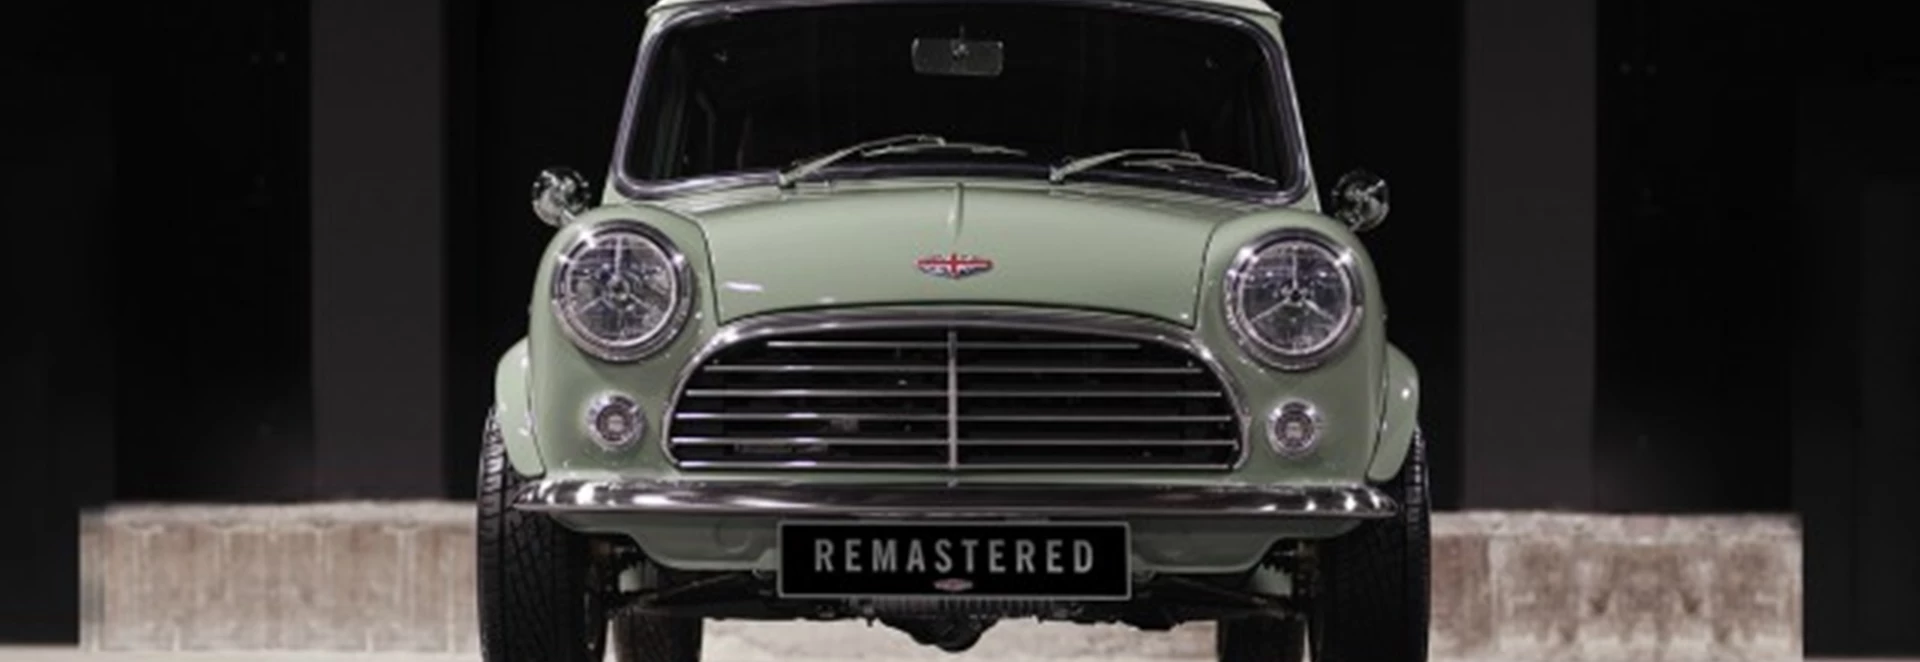 The original MINI is back in ‘Remastered’ form